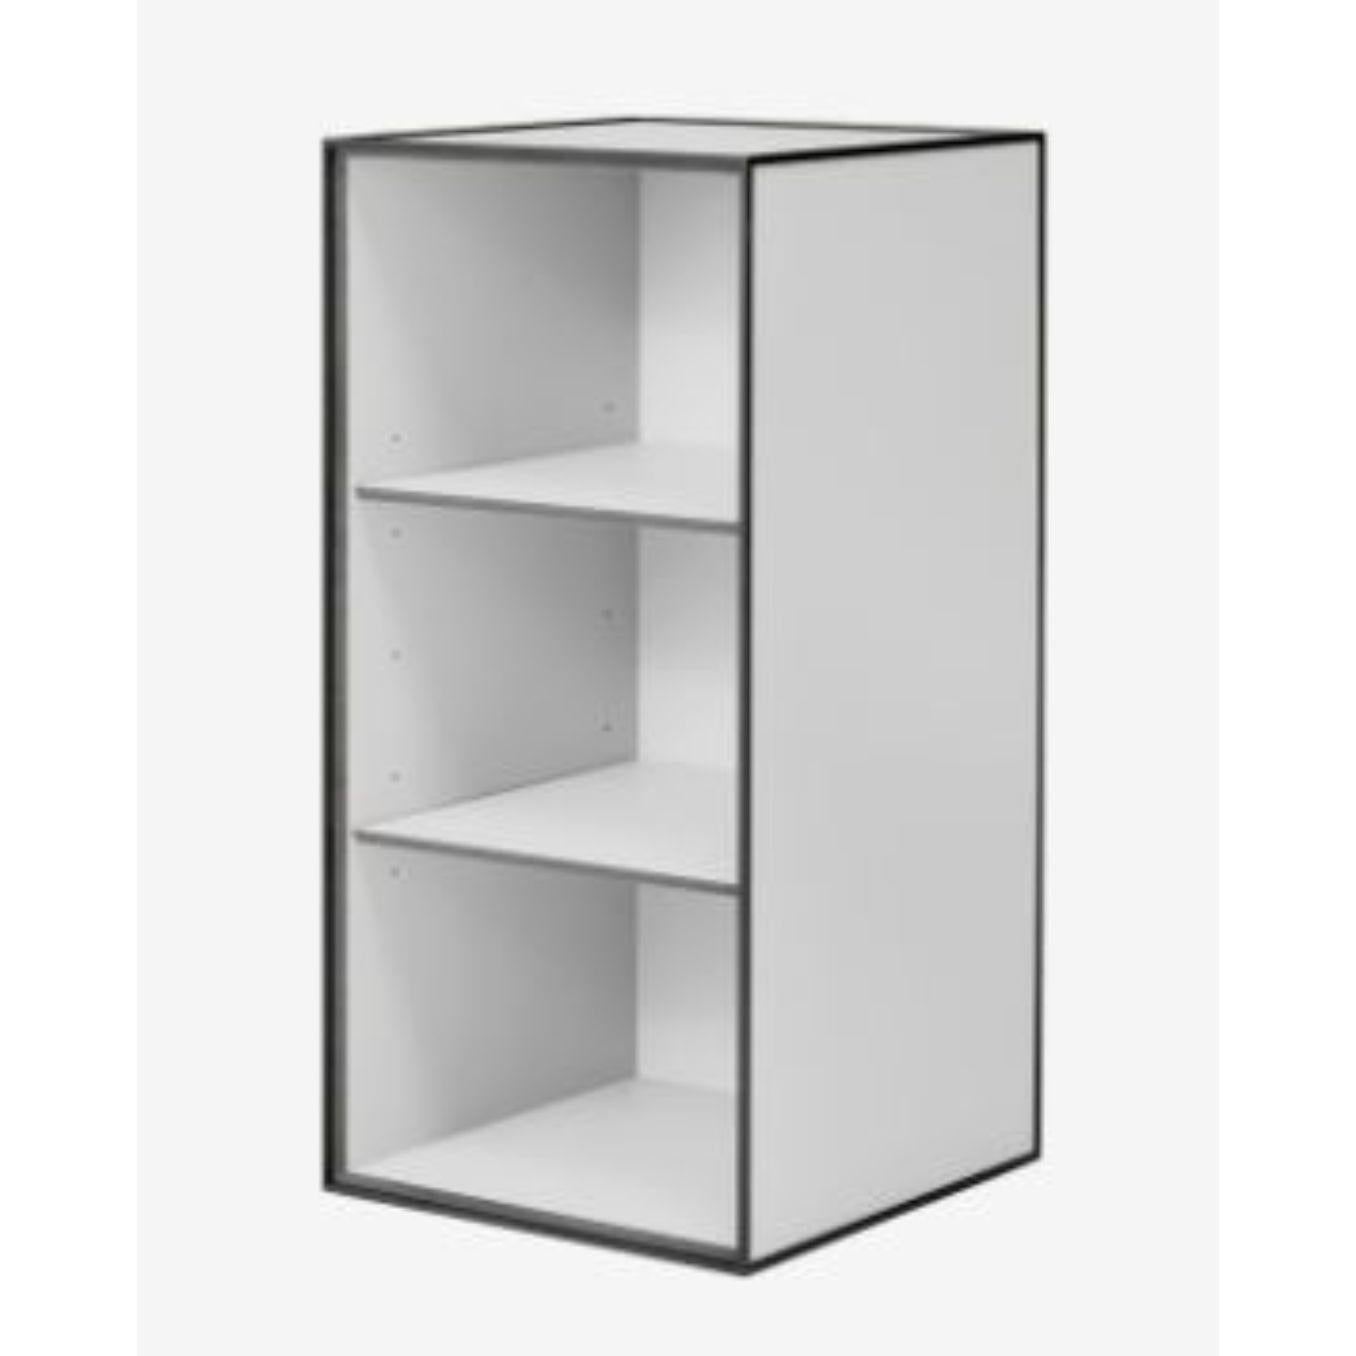 70 light grey frame box with 2 shelves by Lassen.
Dimensions: D 35 x W 35 x H 70 cm. 
Materials: Finér, Melamin, Melamin, Melamine, Metal, Veneer.
Also available in different colours and dimensions. 
Weight: 13 Kg


By Lassen is a Danish